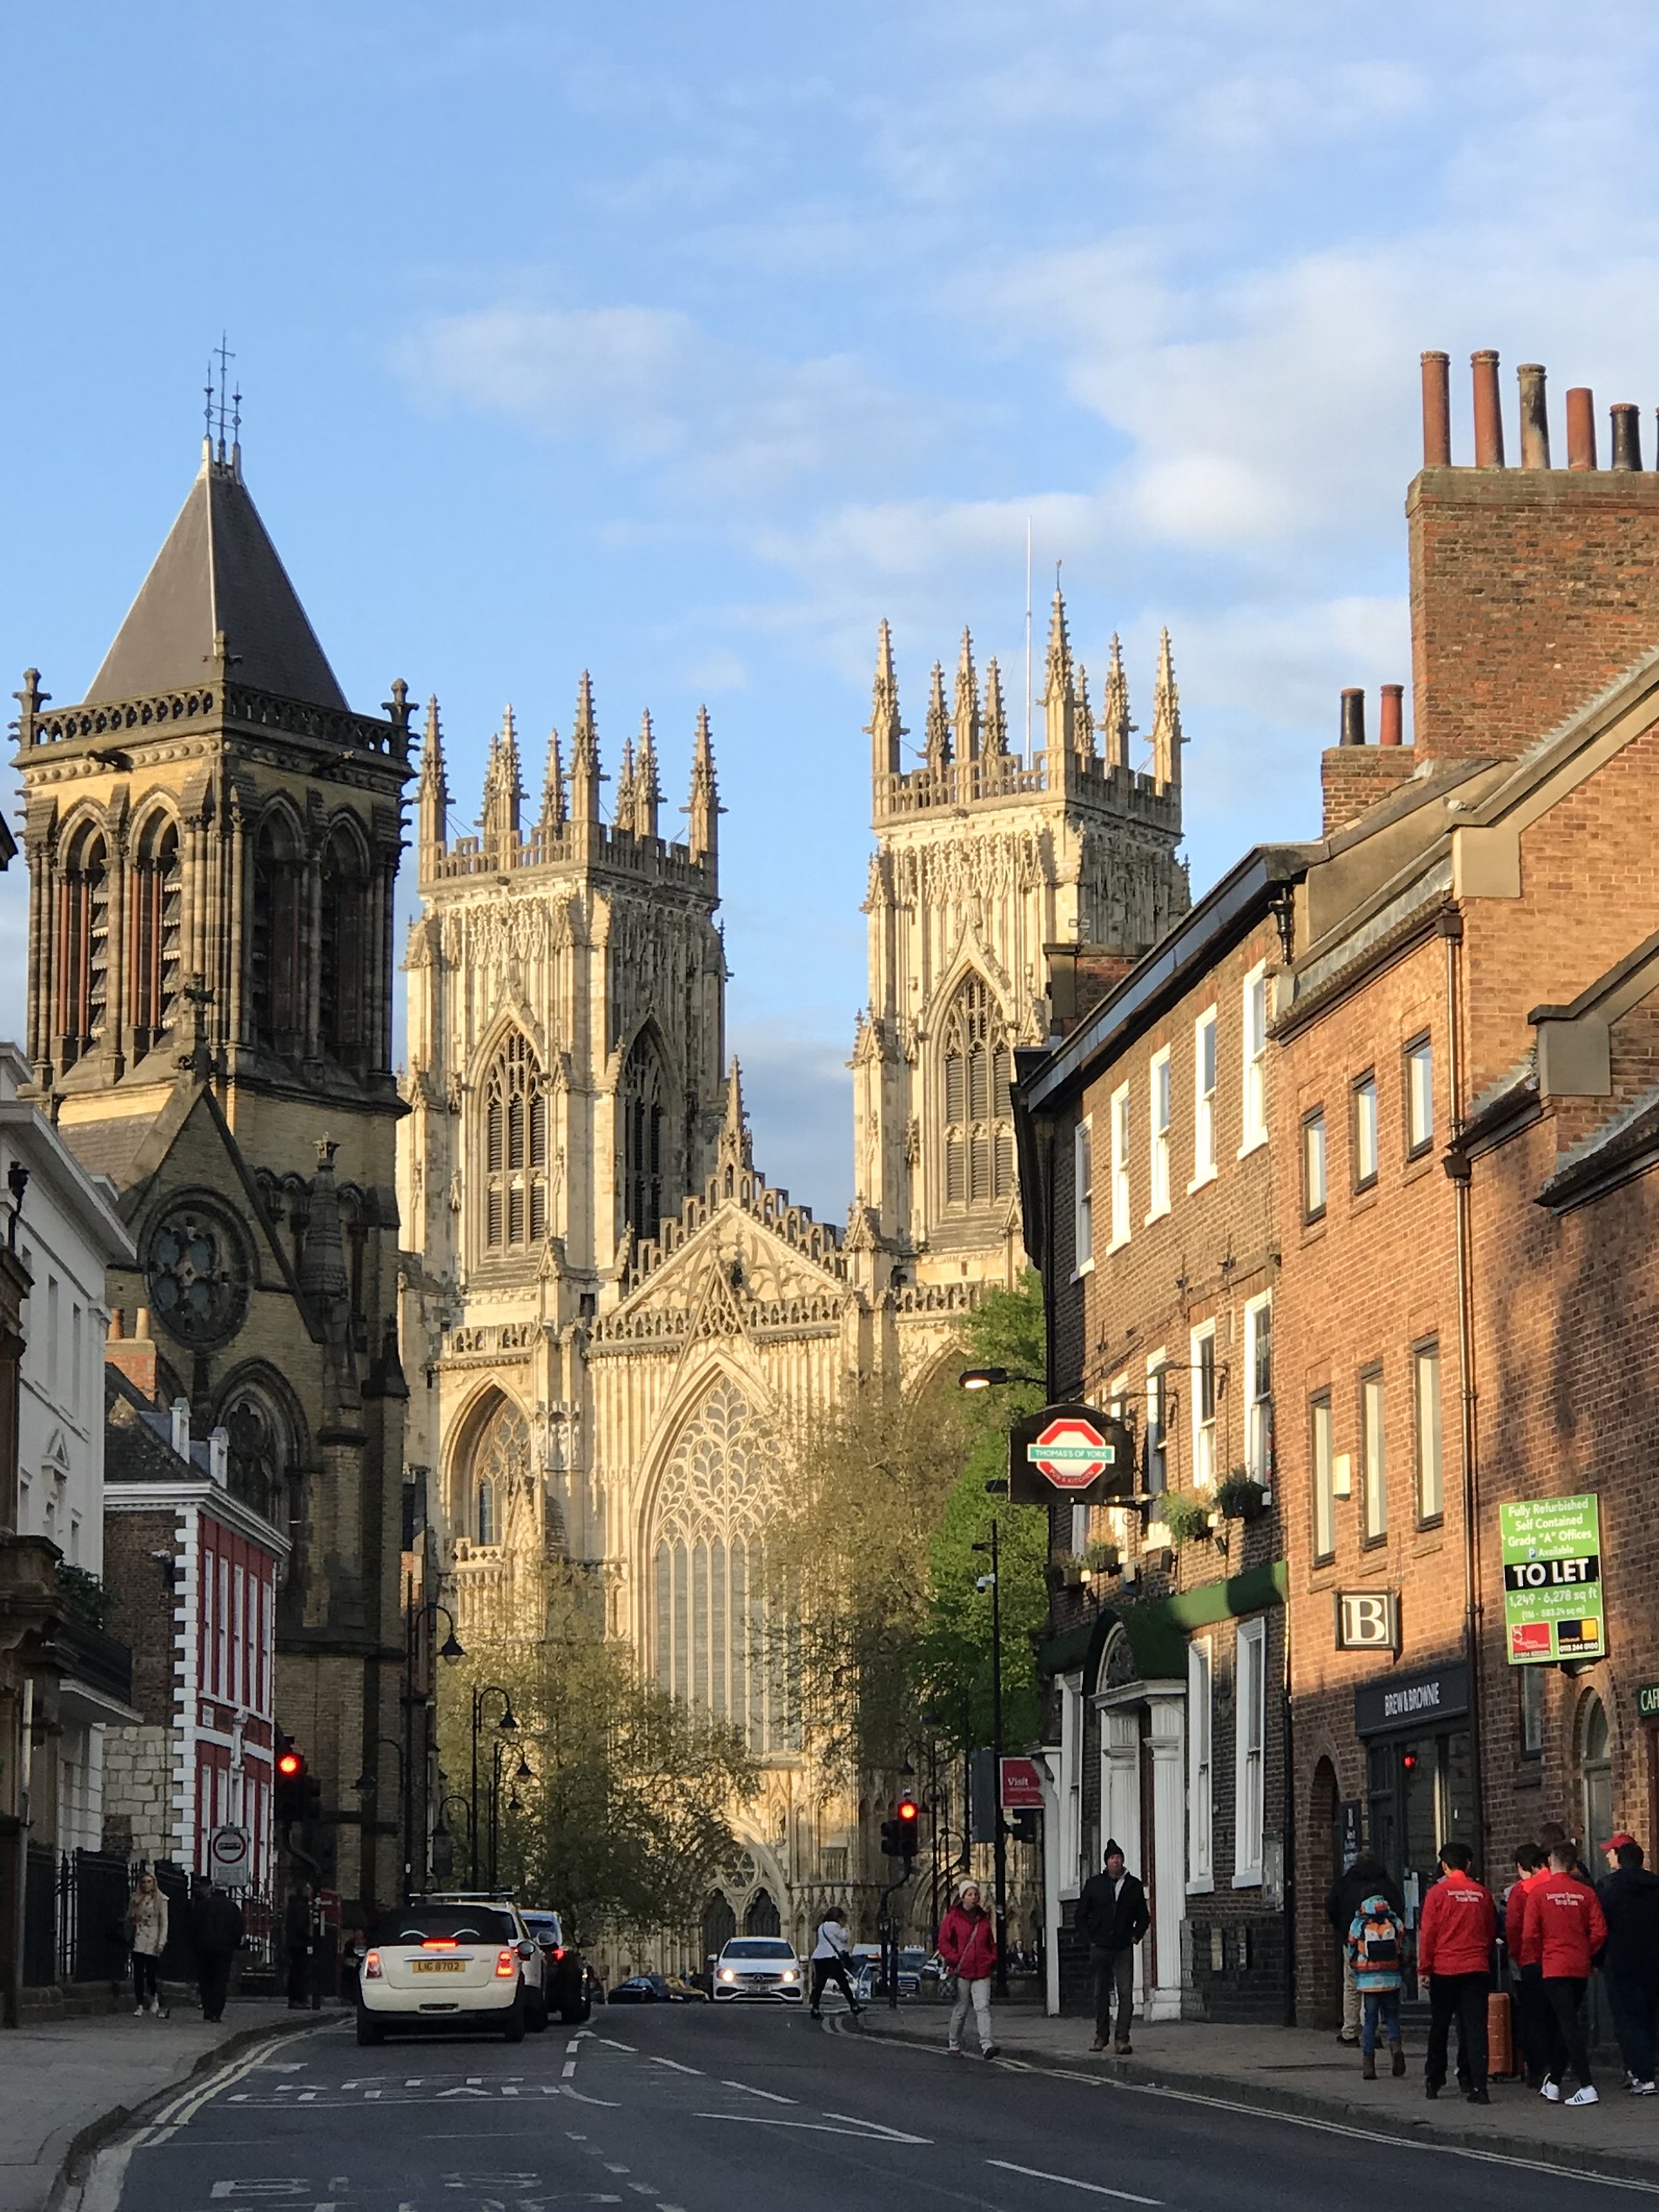 Looking down a street to York Minster Cathedral in the sun